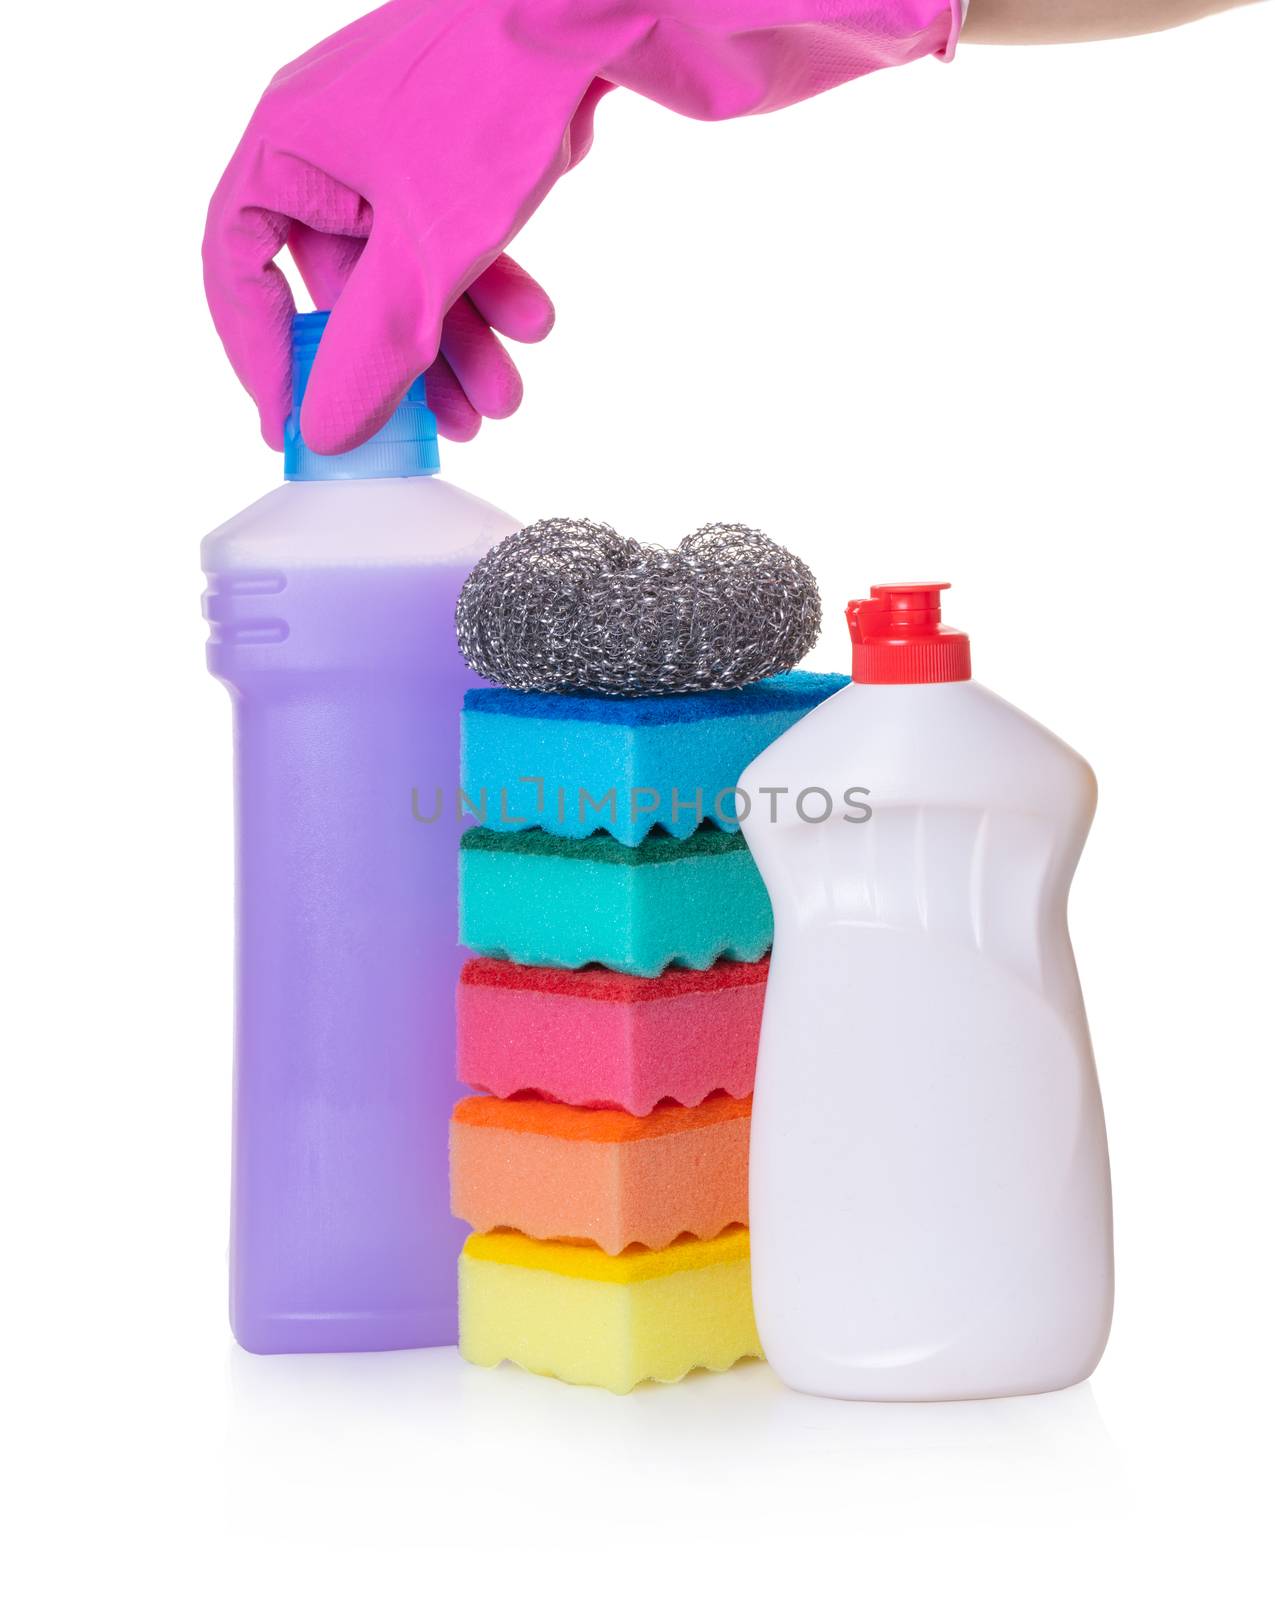 sponges for washing utensils and detergents  by MegaArt